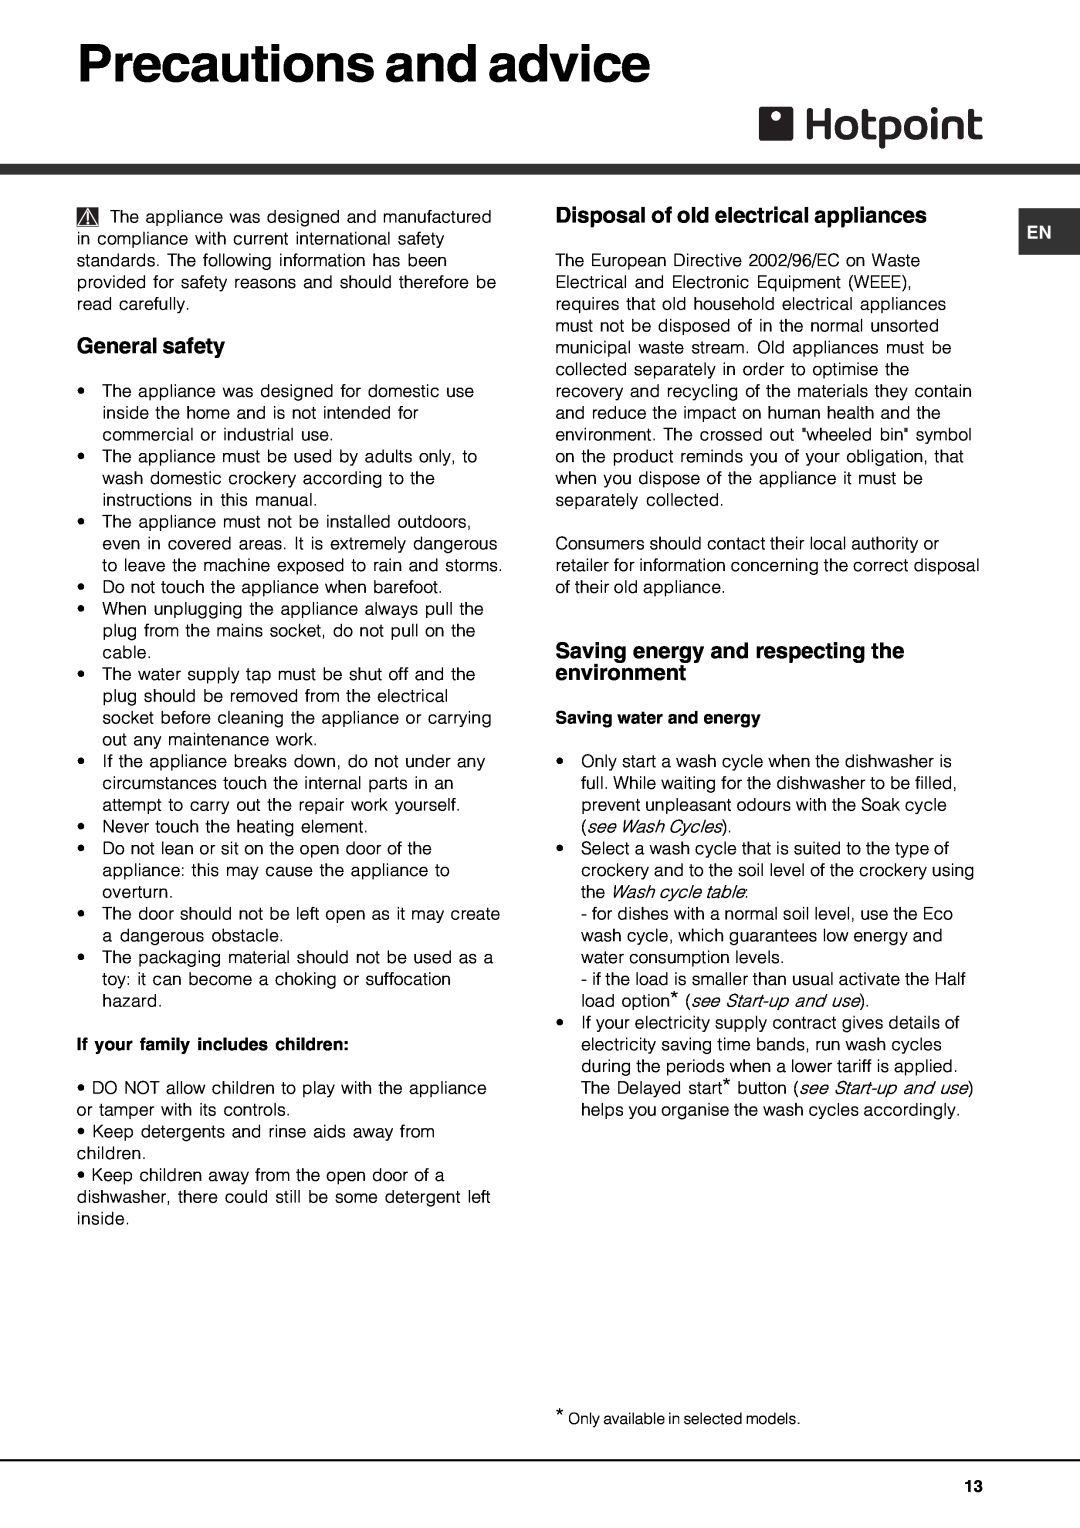 Hotpoint LFZ 338 A/HA IX manual Precautions and advice, General safety, Disposal of old electrical appliances 